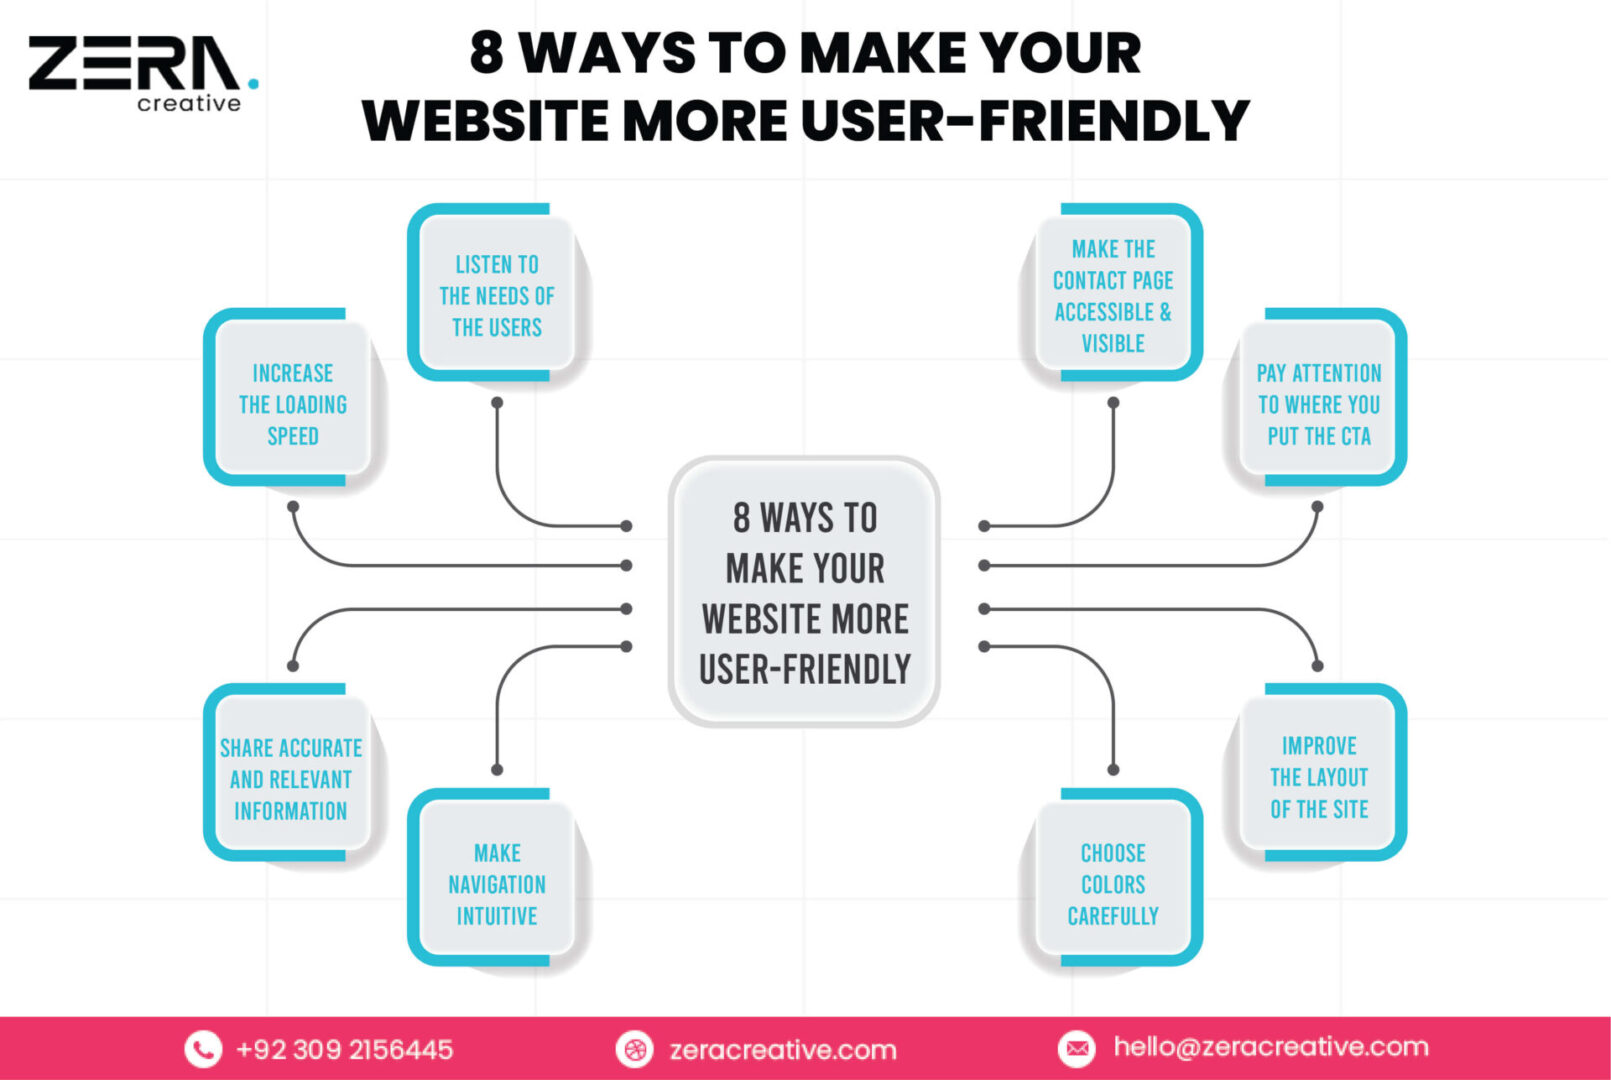 8 Ways to Make Your Website More User-Friendly - infographic 05 scaled - Zera Creative